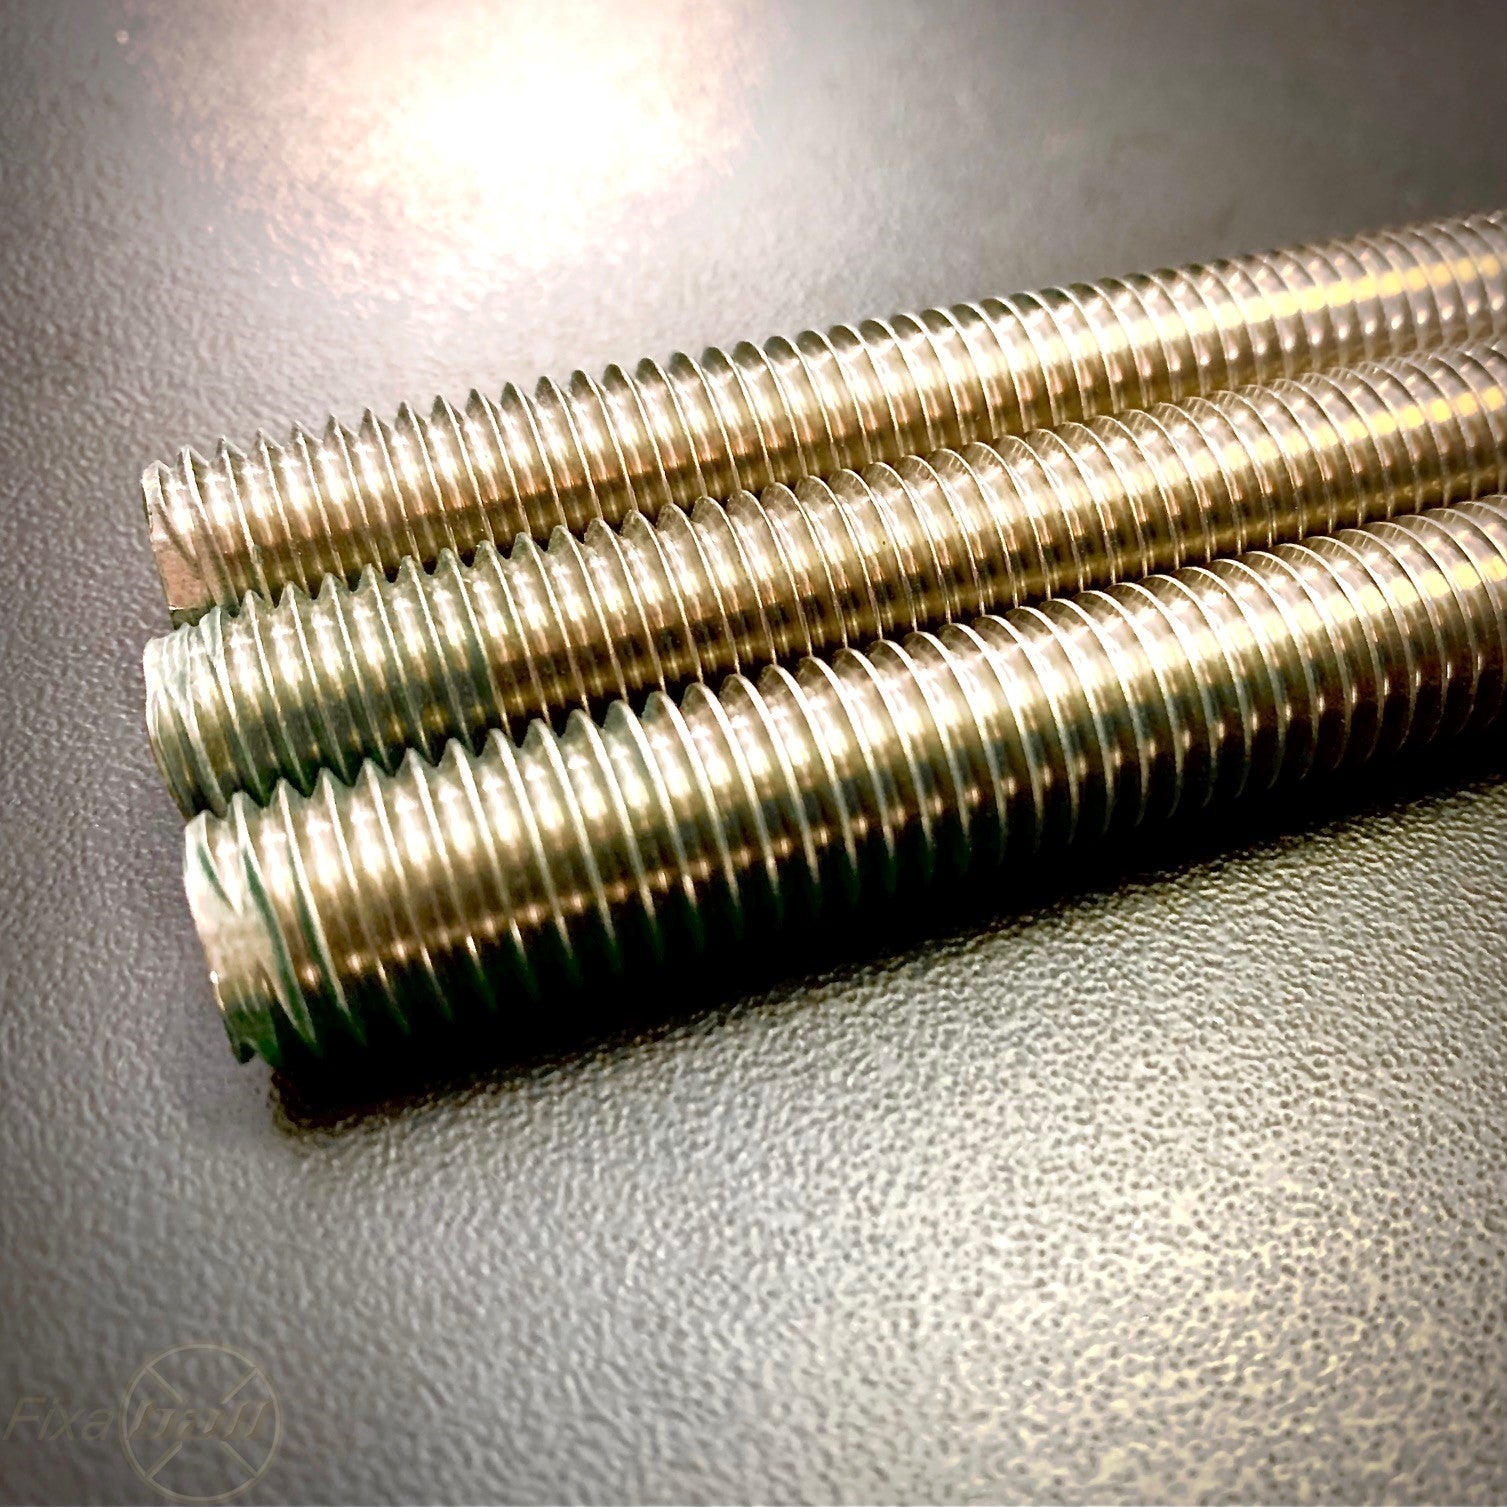 Metric, 500mm, A2/ 304 Stainless Steel, All Threaded Bar/ Studding/ Rod Threaded Bar/ Studding Metric, 500mm, A2/ 304 Stainless Steel, All Threaded Bar/ Studding/ Rod METRIC - A2/ 304 Stainless Studding